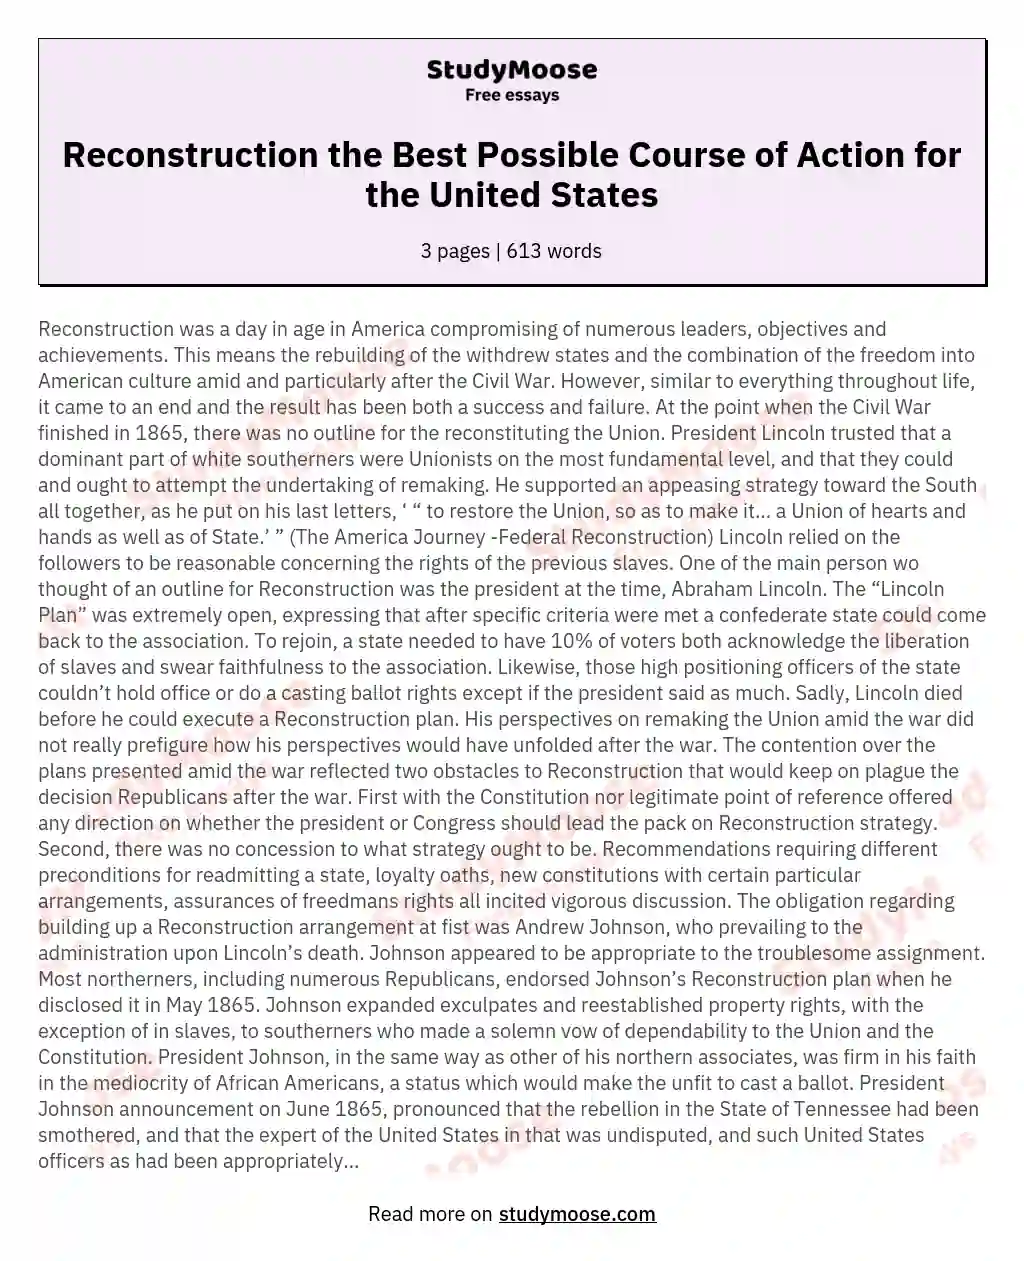 Reconstruction the Best Possible Course of Action for the United States essay